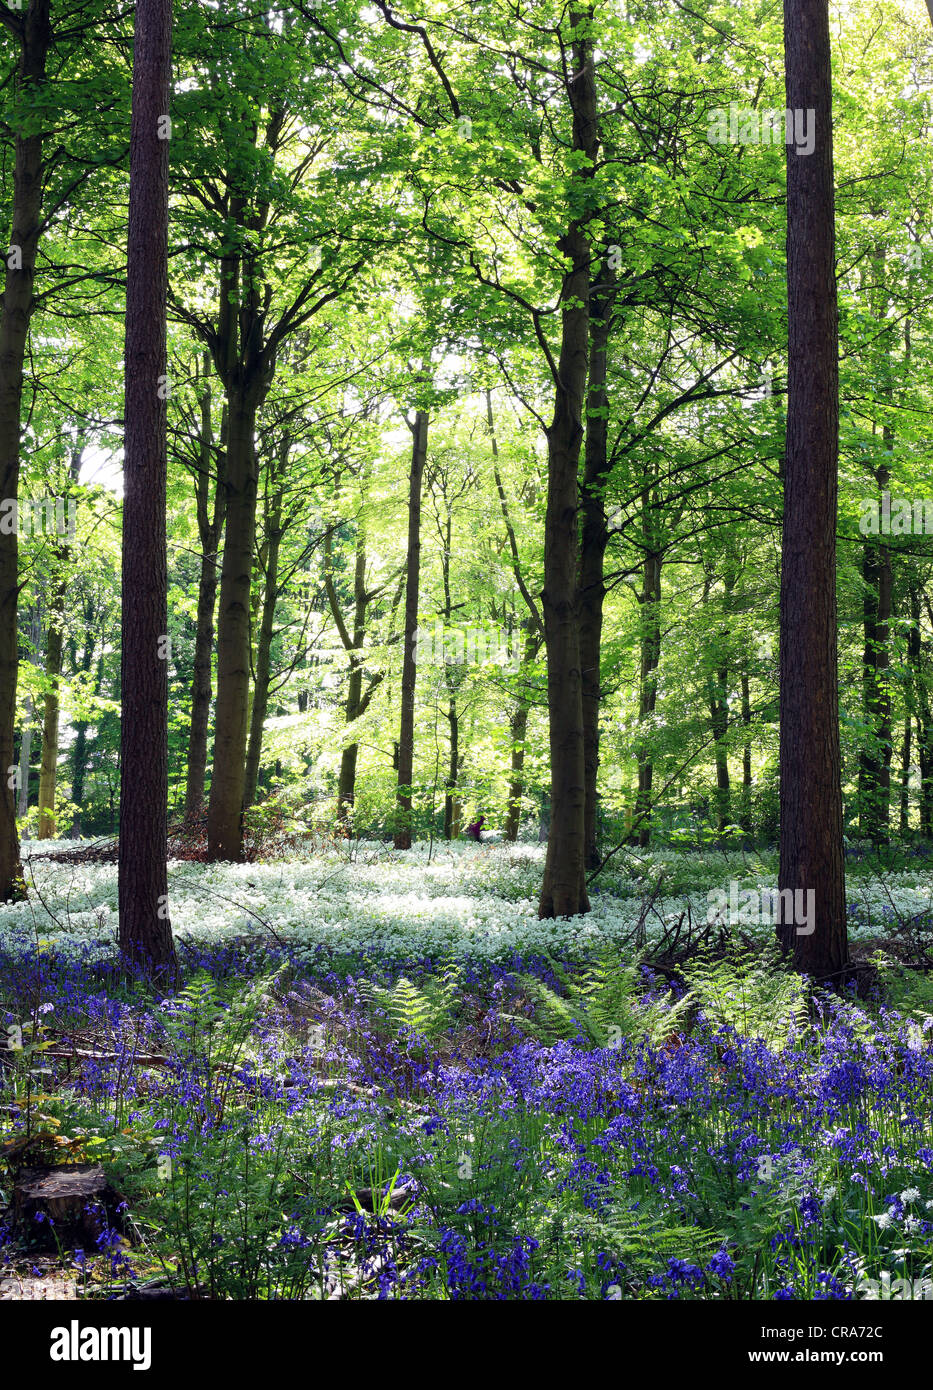 This image of Dalkeith Country Park near Edinburgh, Scotland shows an old woodland with native bluebells and wild garlic. Stock Photo